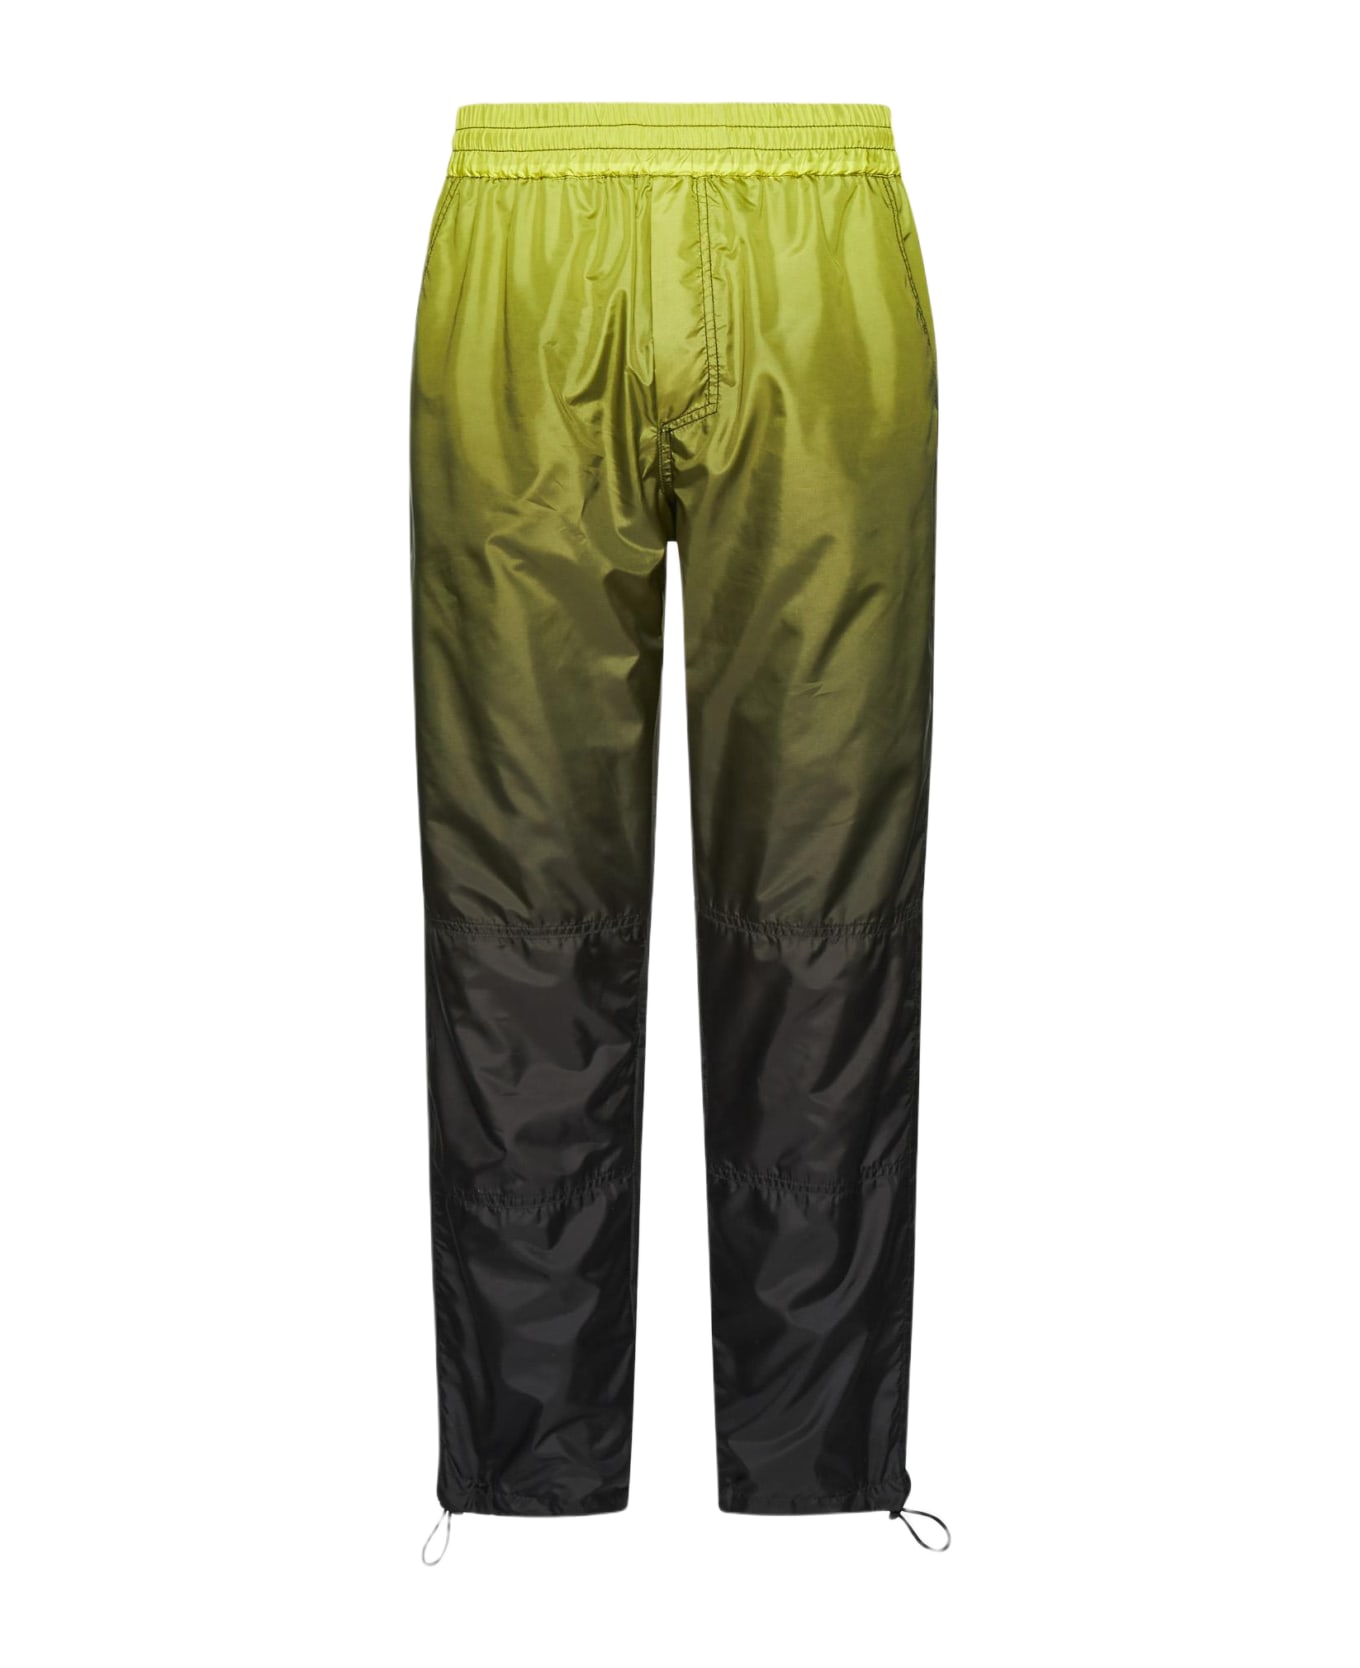 44 Label Group Grief Nylon Trousers